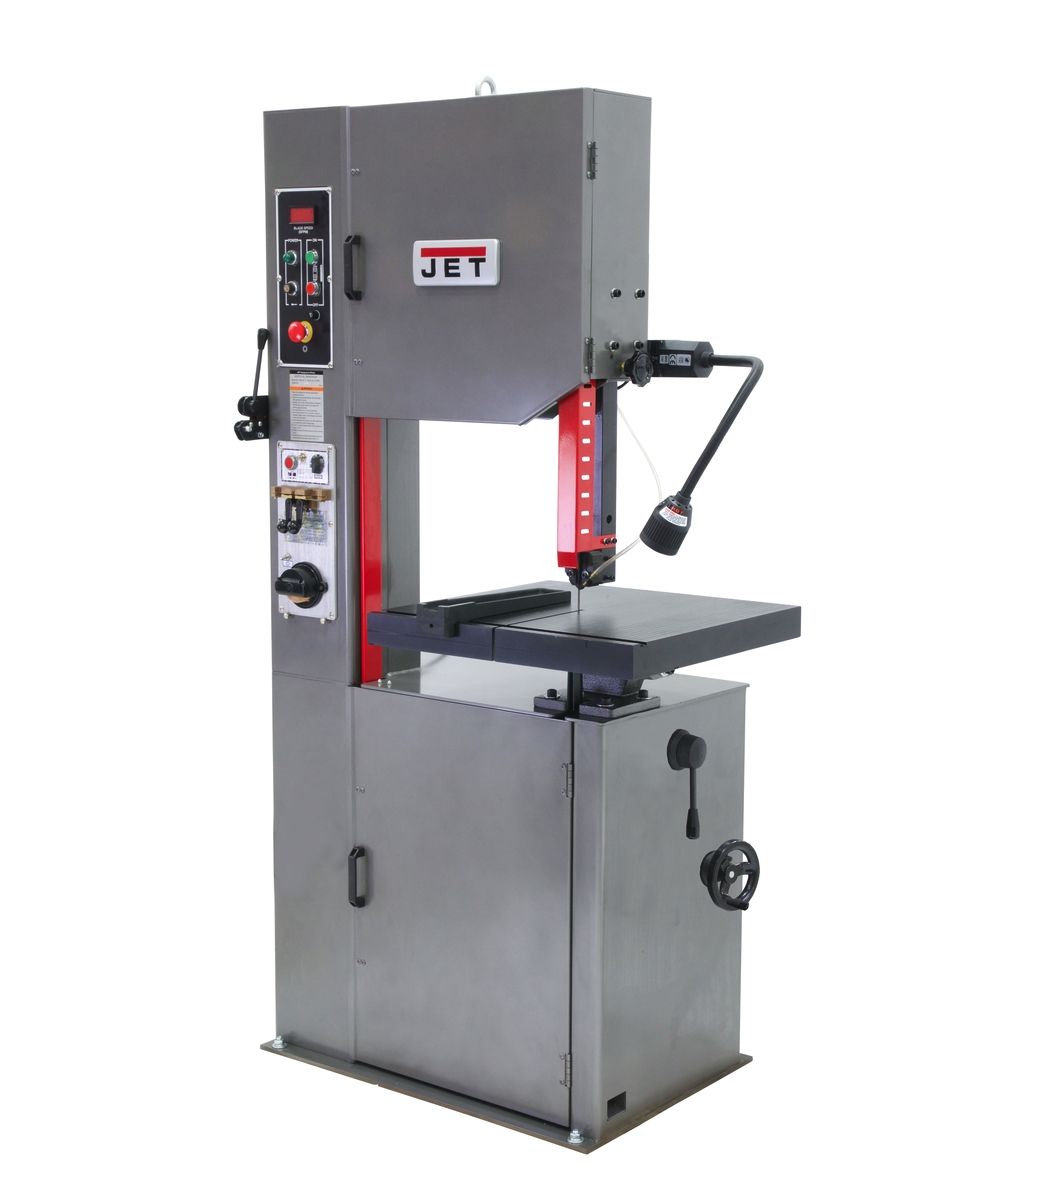 JET VBS-1610, 16" Vertical Band Saw